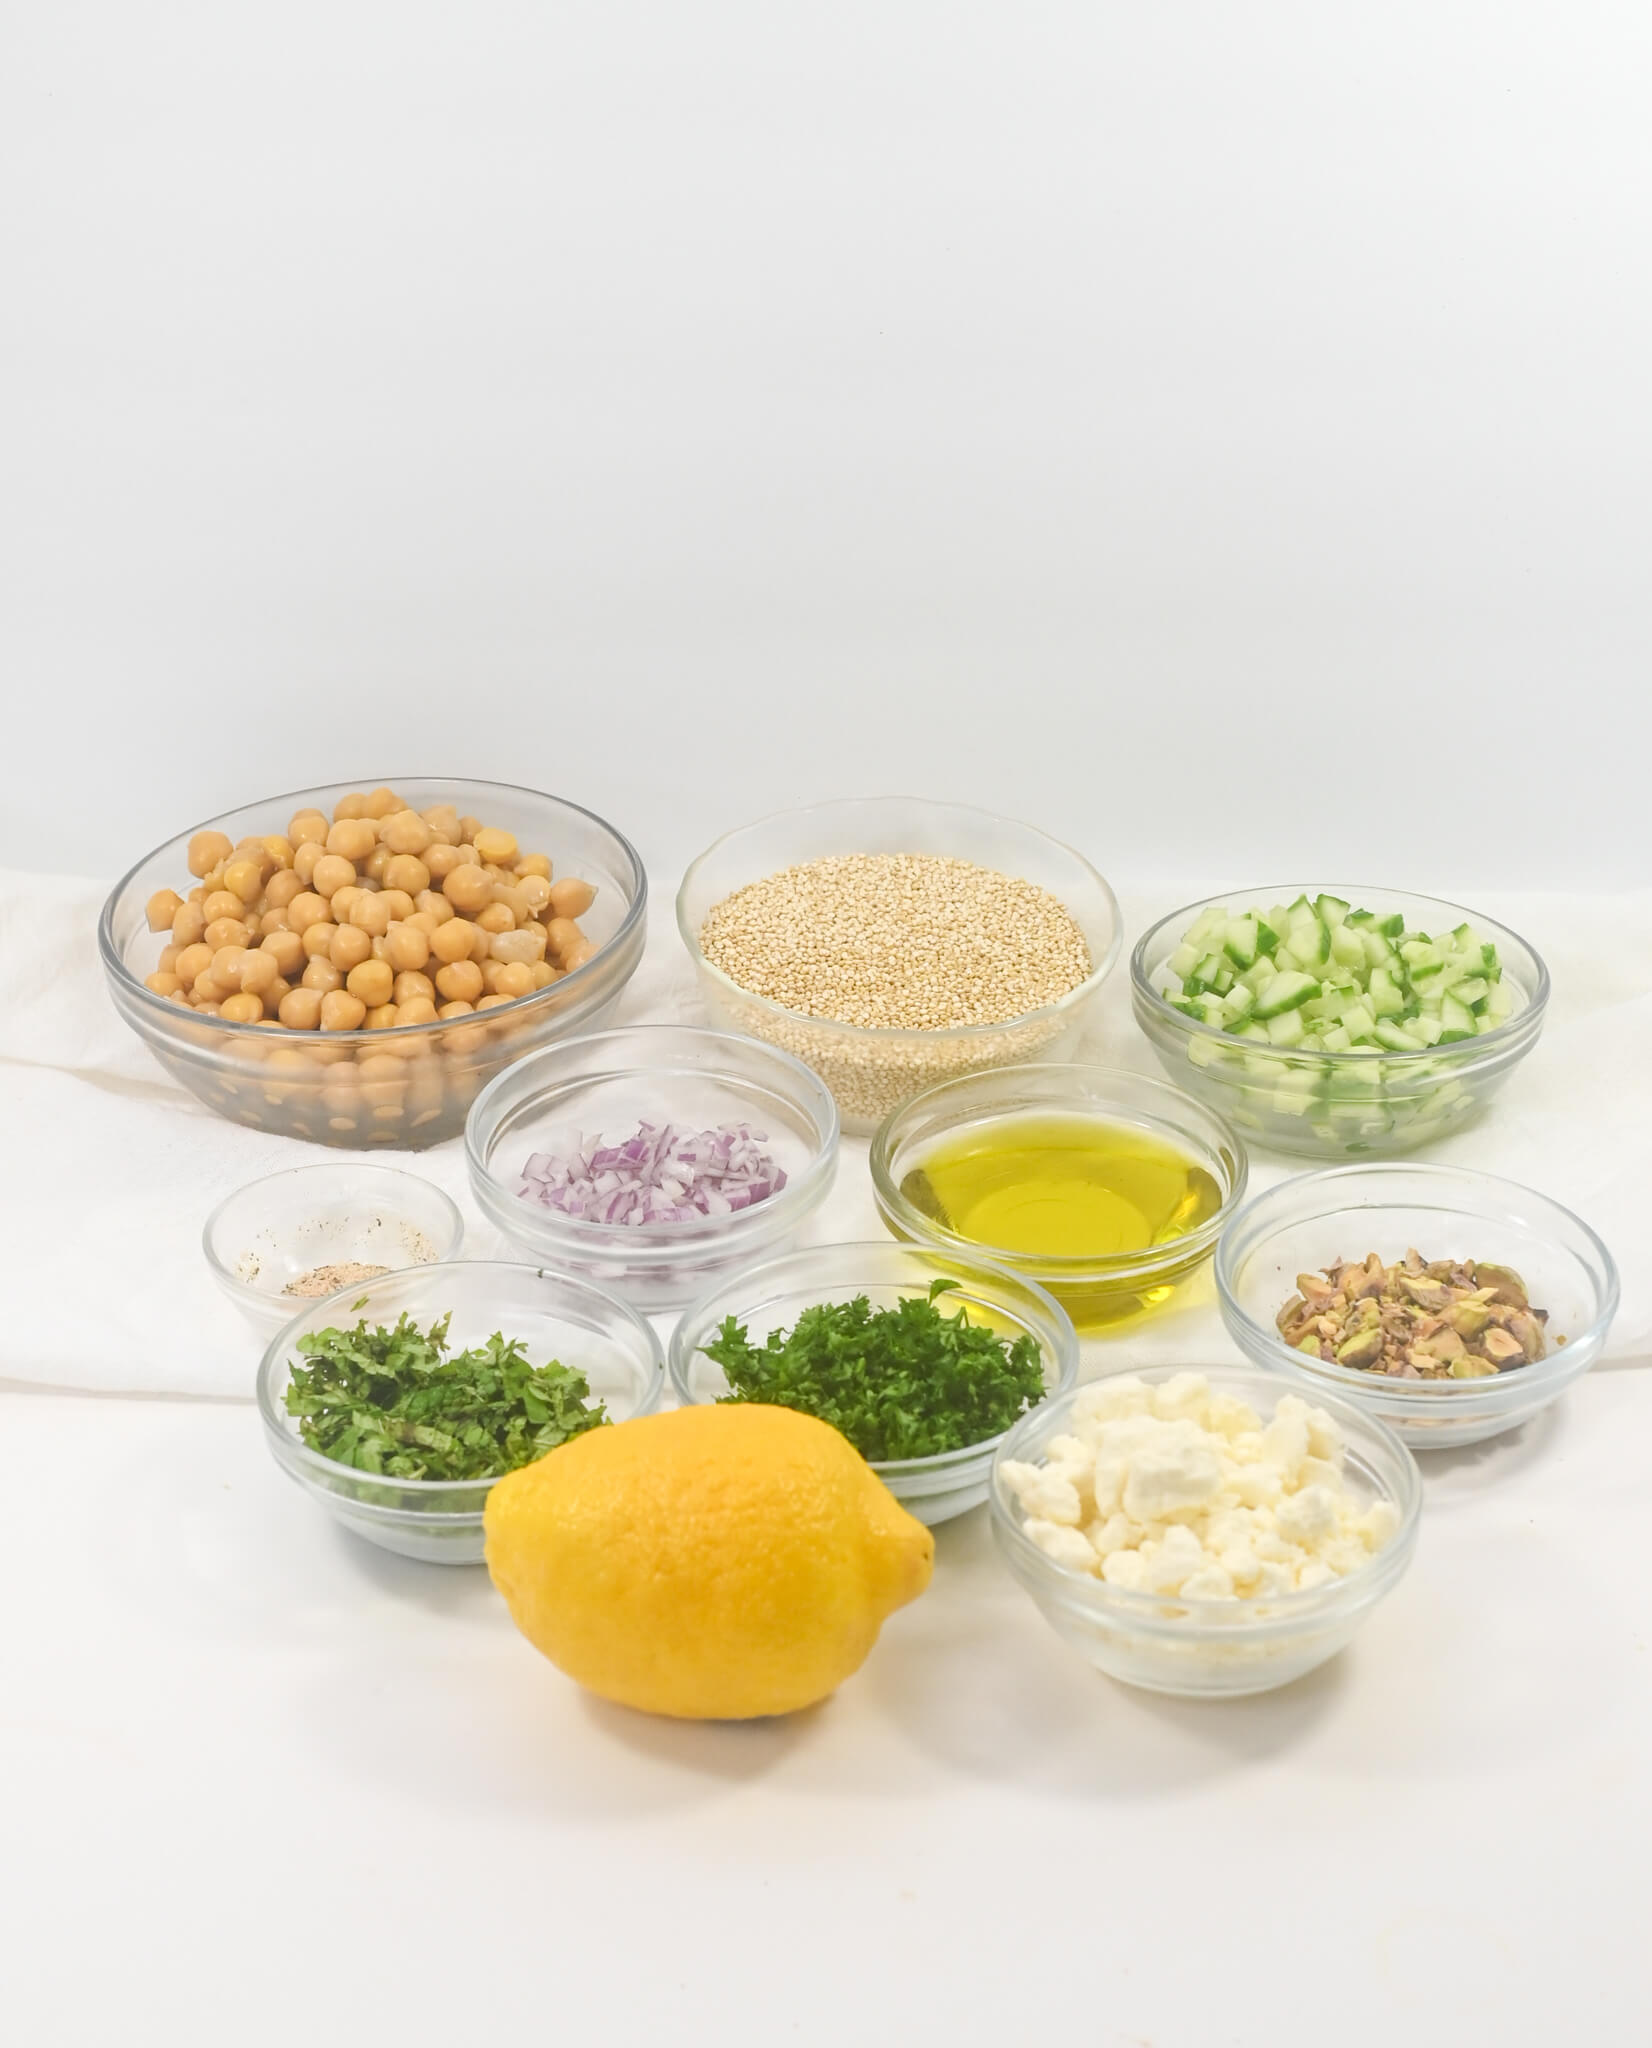 Ingredients for the dish salad arranged neatly, including chickpeas, quinoa, cucumbers, red onions, herbs, lemon, nuts, oil, and feta cheese in separate